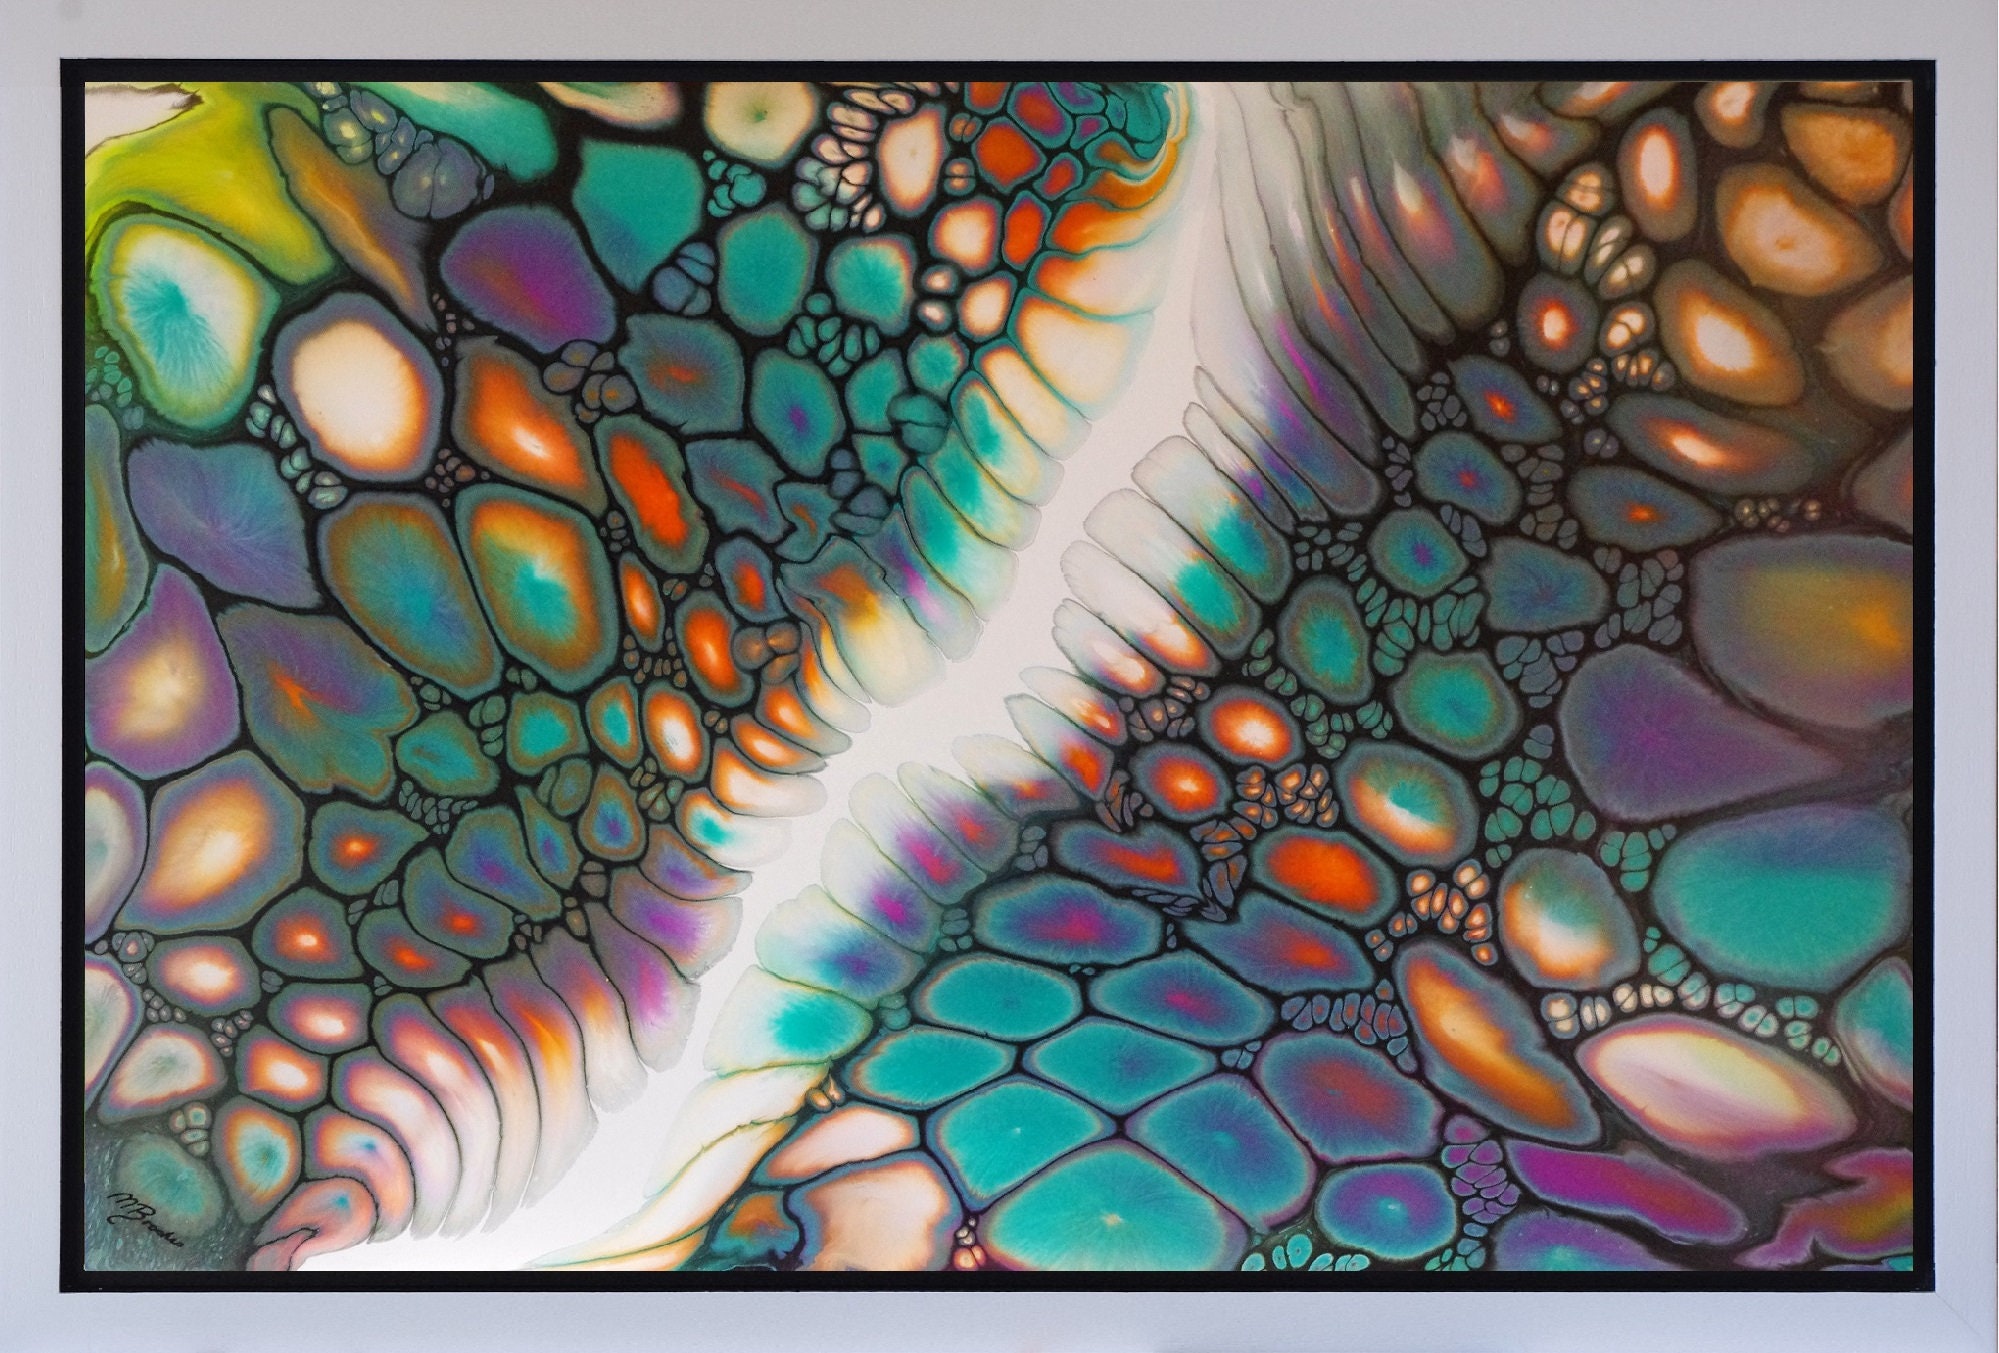 Framed Fluid Acrylic Painting Pour Art Modern Abstract Contemporary Cells  Resin Finish by Maria Brookes 970 X 660 Mm 38 X 26 Inches 